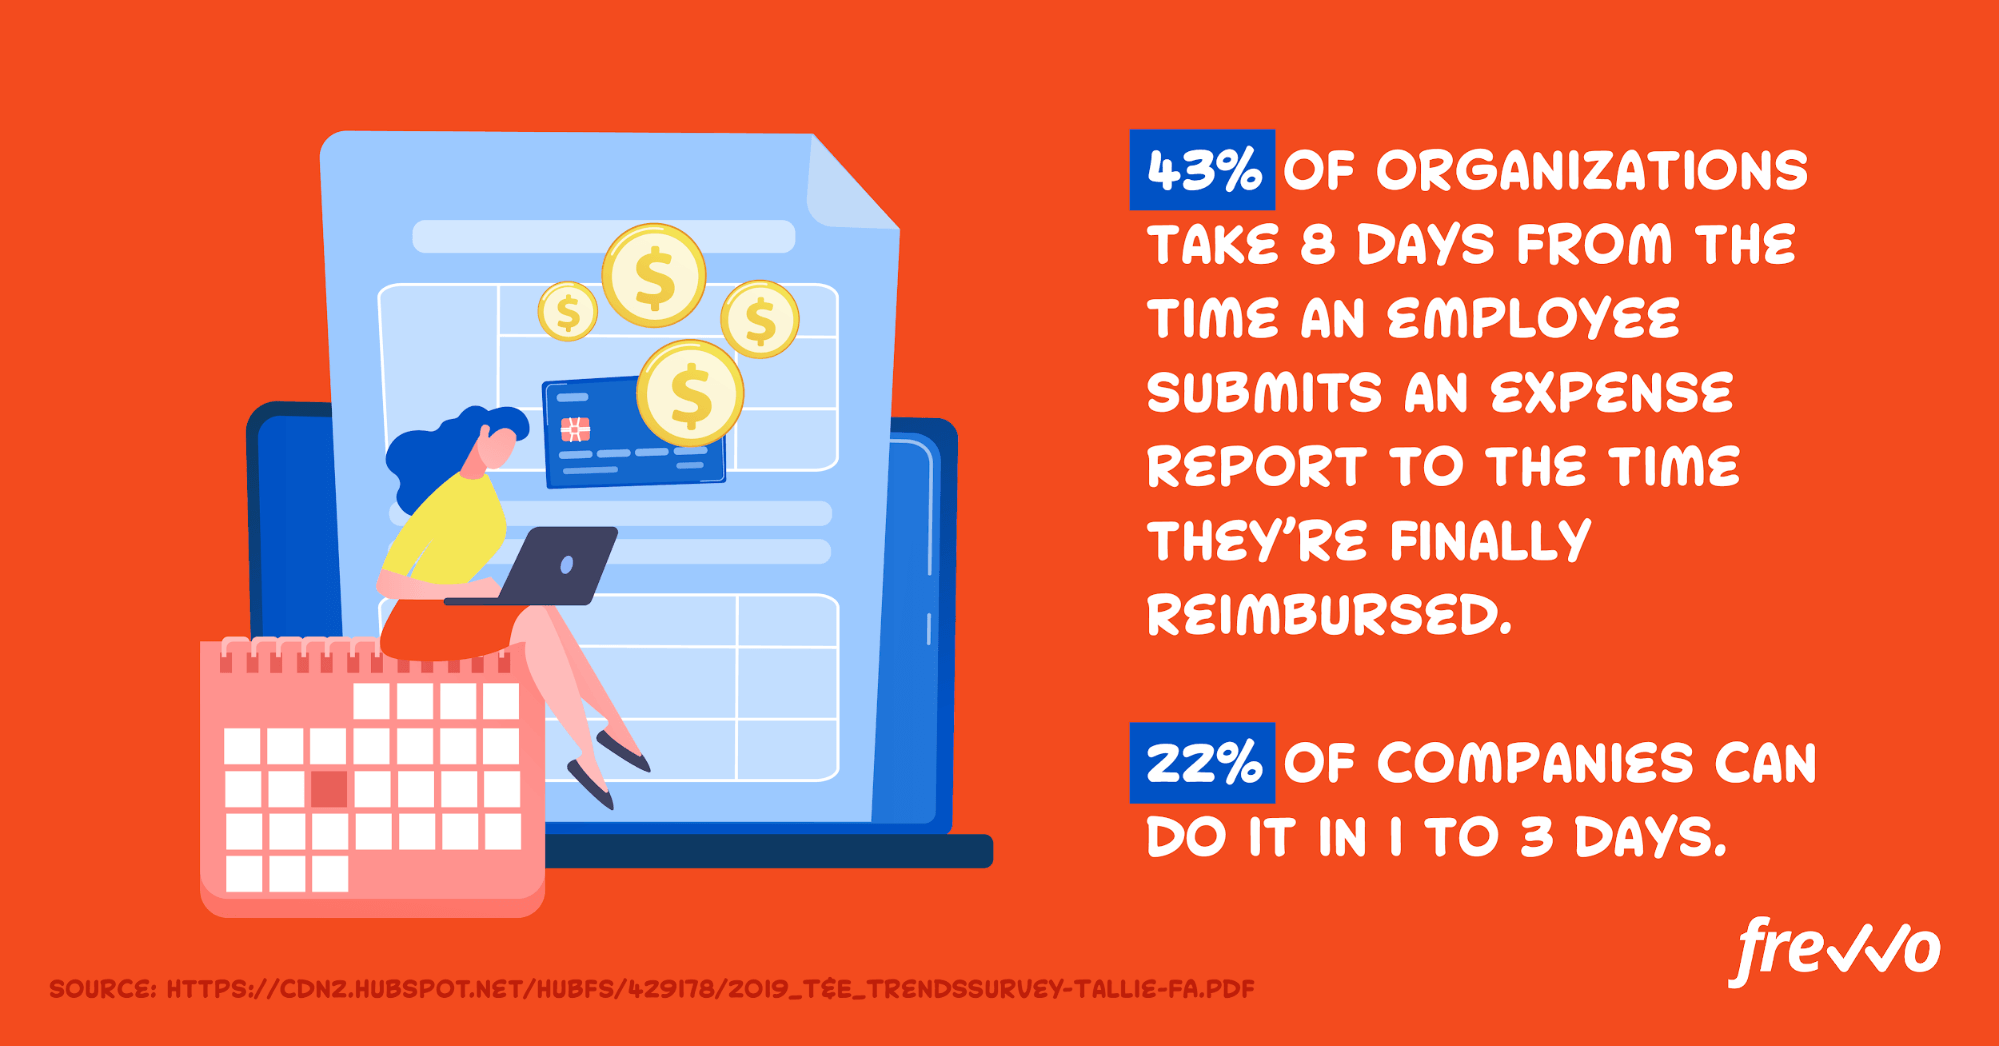 43% of organizations take 8 days to process an expense report 